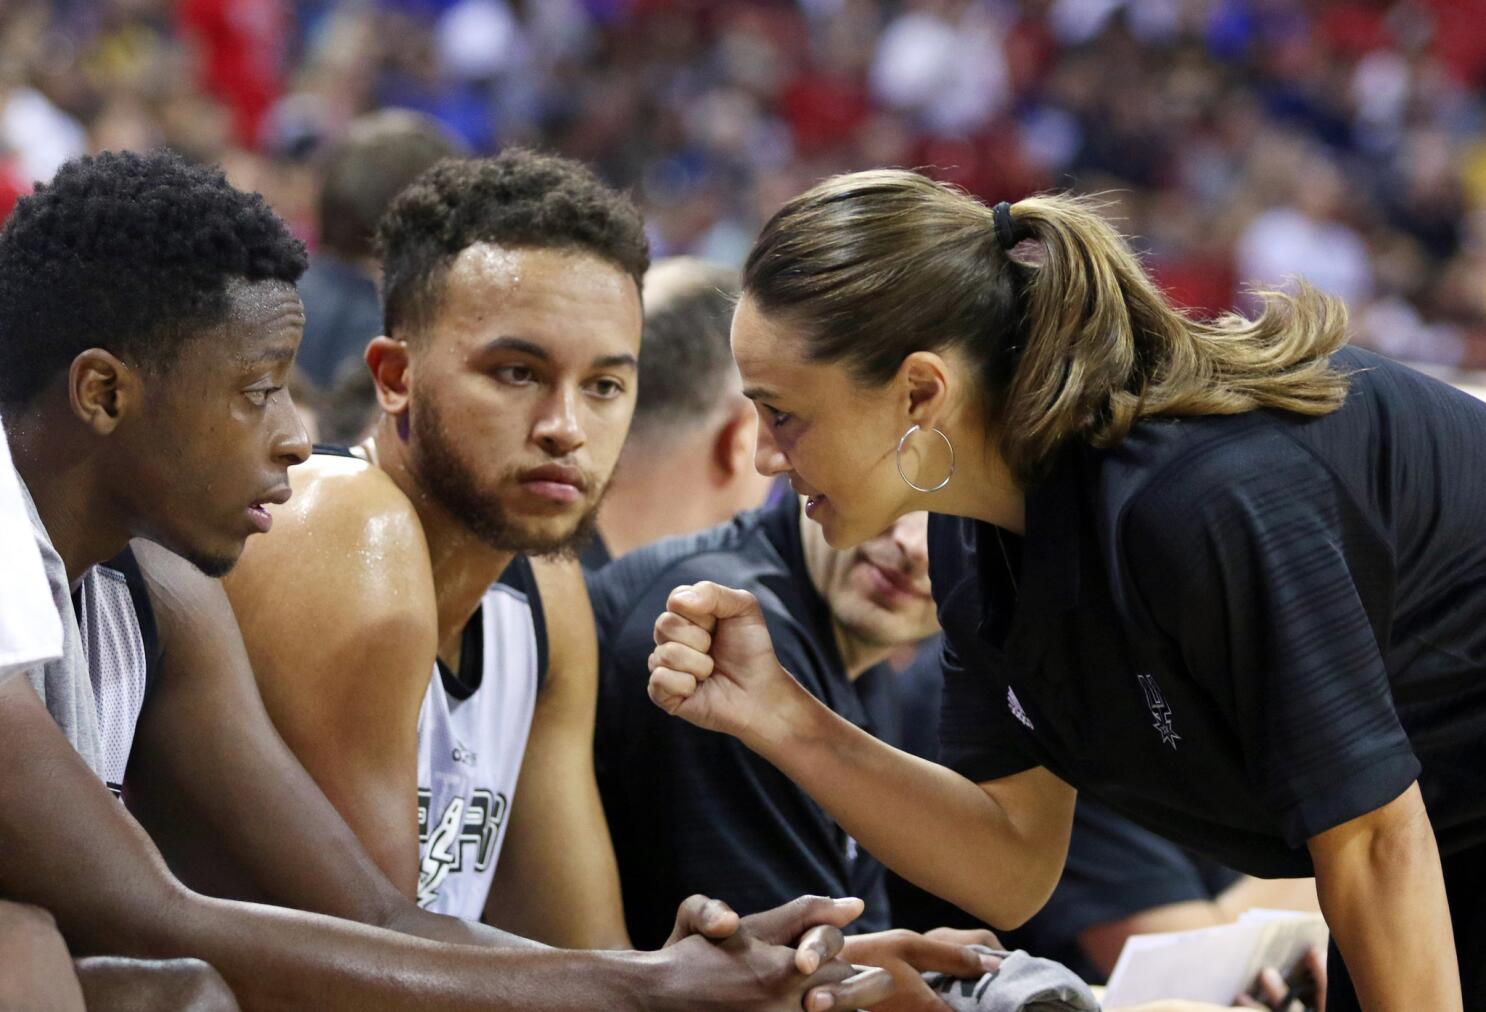 Like Becky Hammon, a list of female coaches in men's athletics